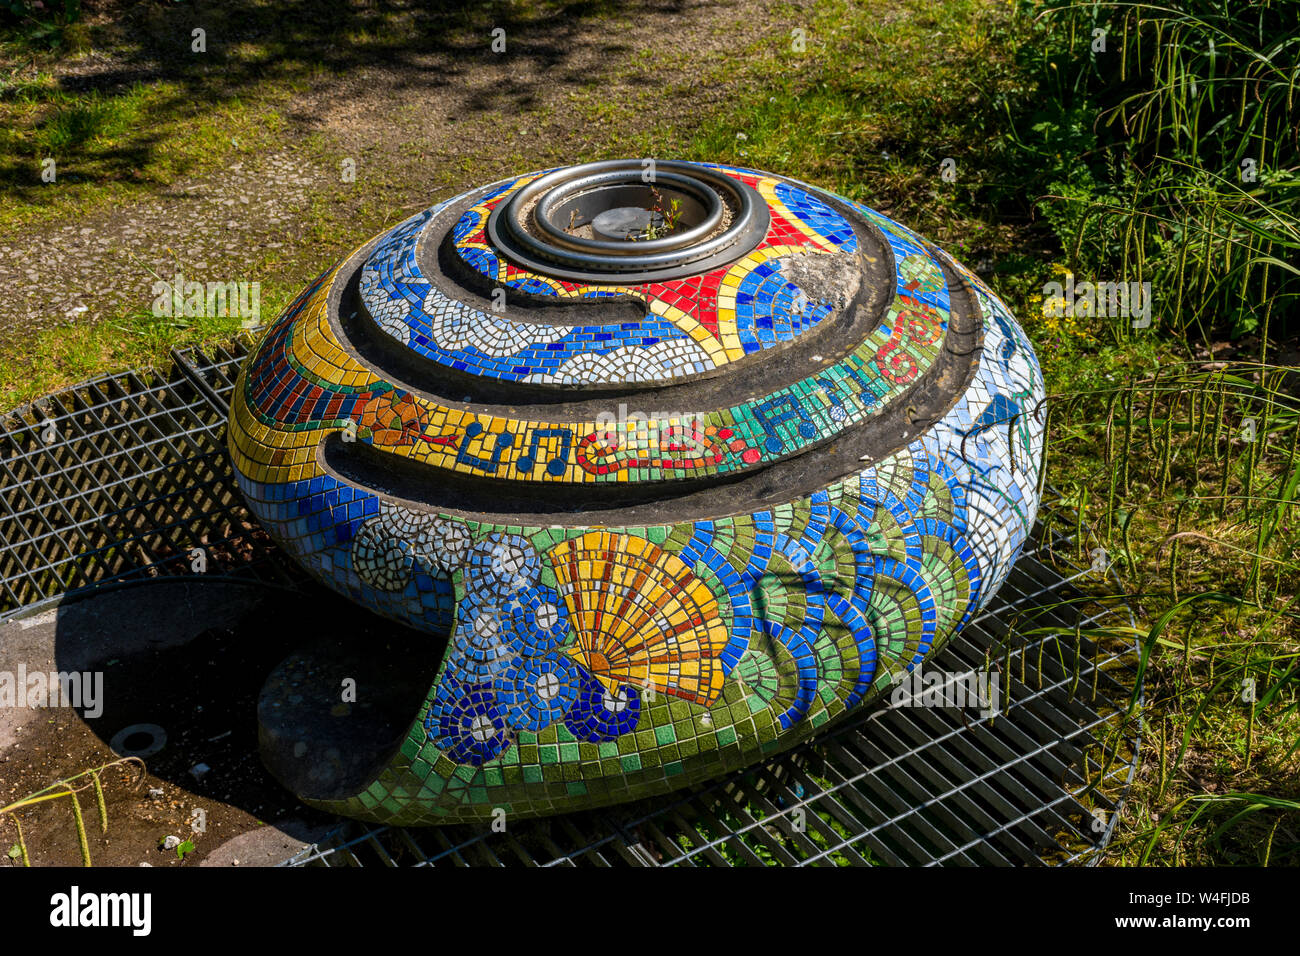 Shell sculpture with mosaics (details not known), Hulme Park, Manchester, UK Stock Photo